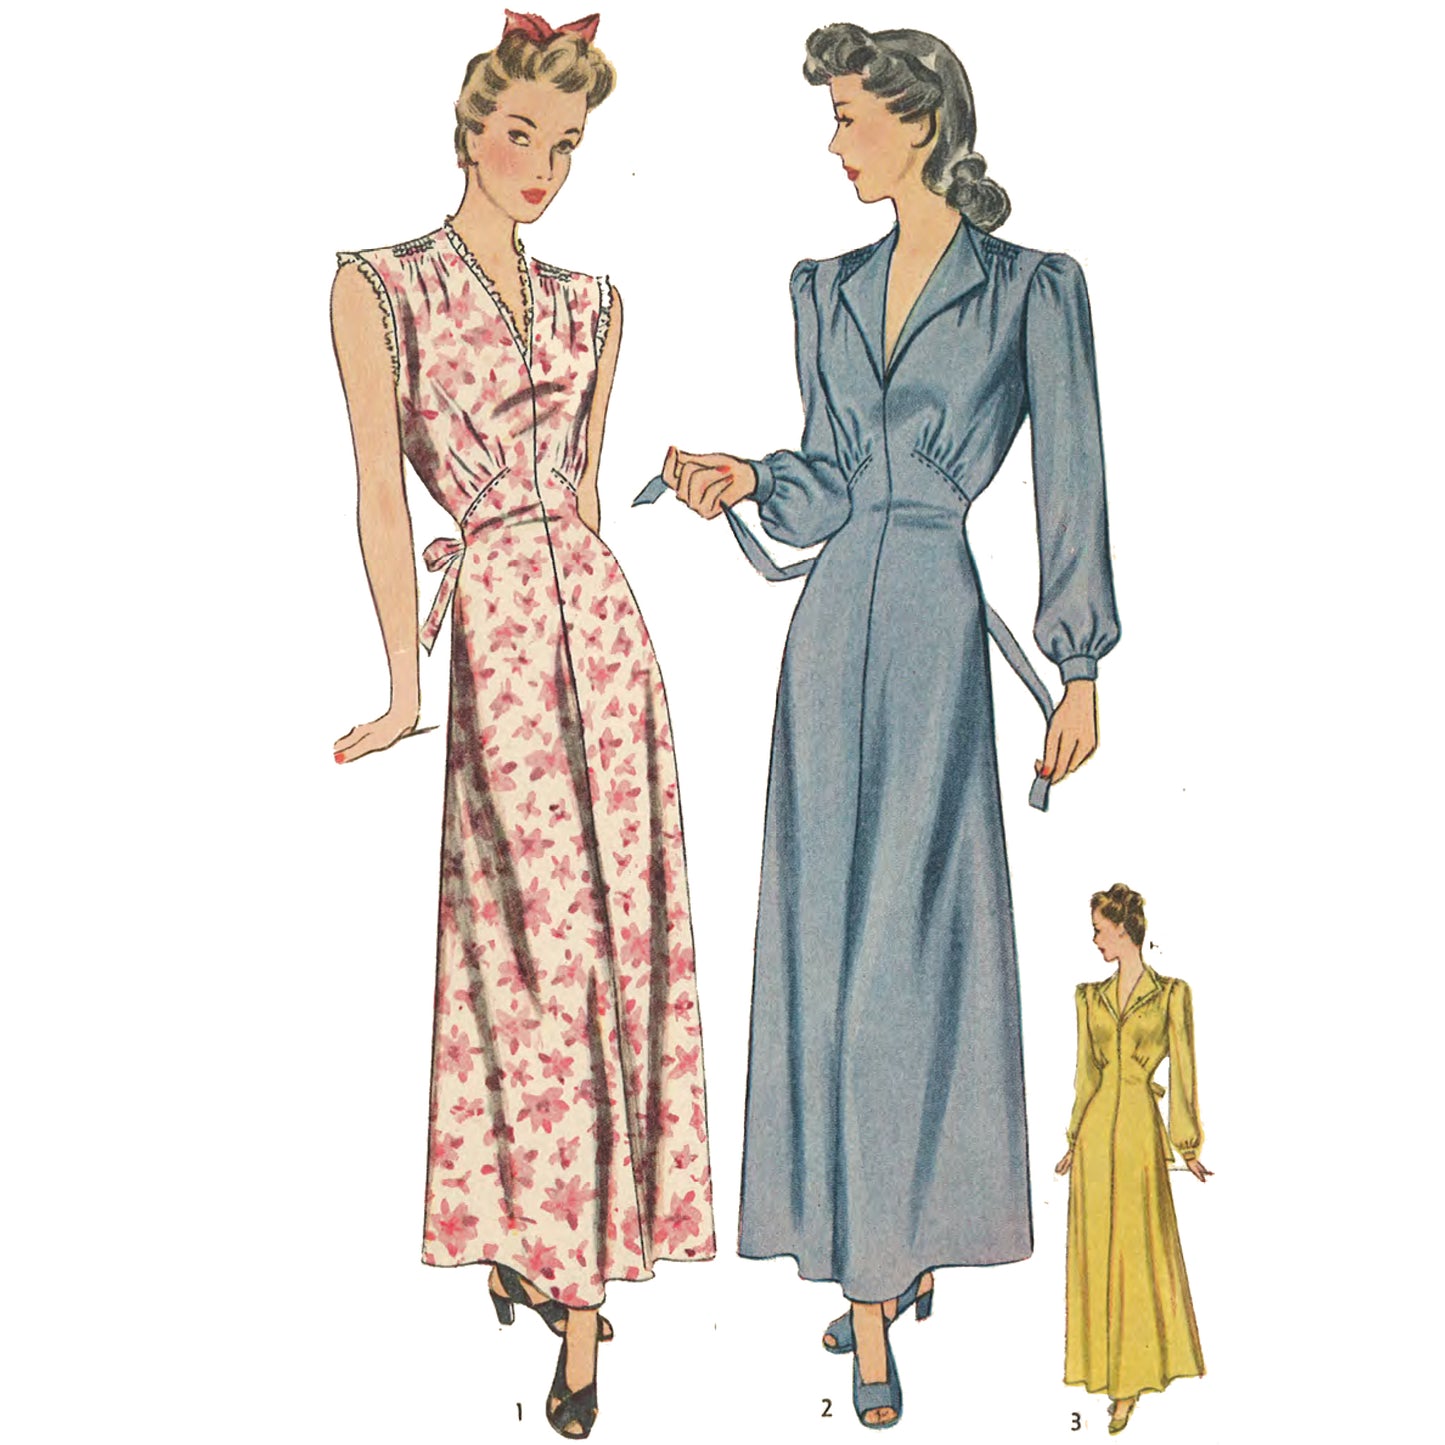 Women wearing nightgowns. Left, sleeveless and collarless, made in white material with floral pattern. Middle, long sleeved with lapel collar, made in blue material. Right, smaller image, long sleeve with lapels, trimmed with lace, made in yellow.